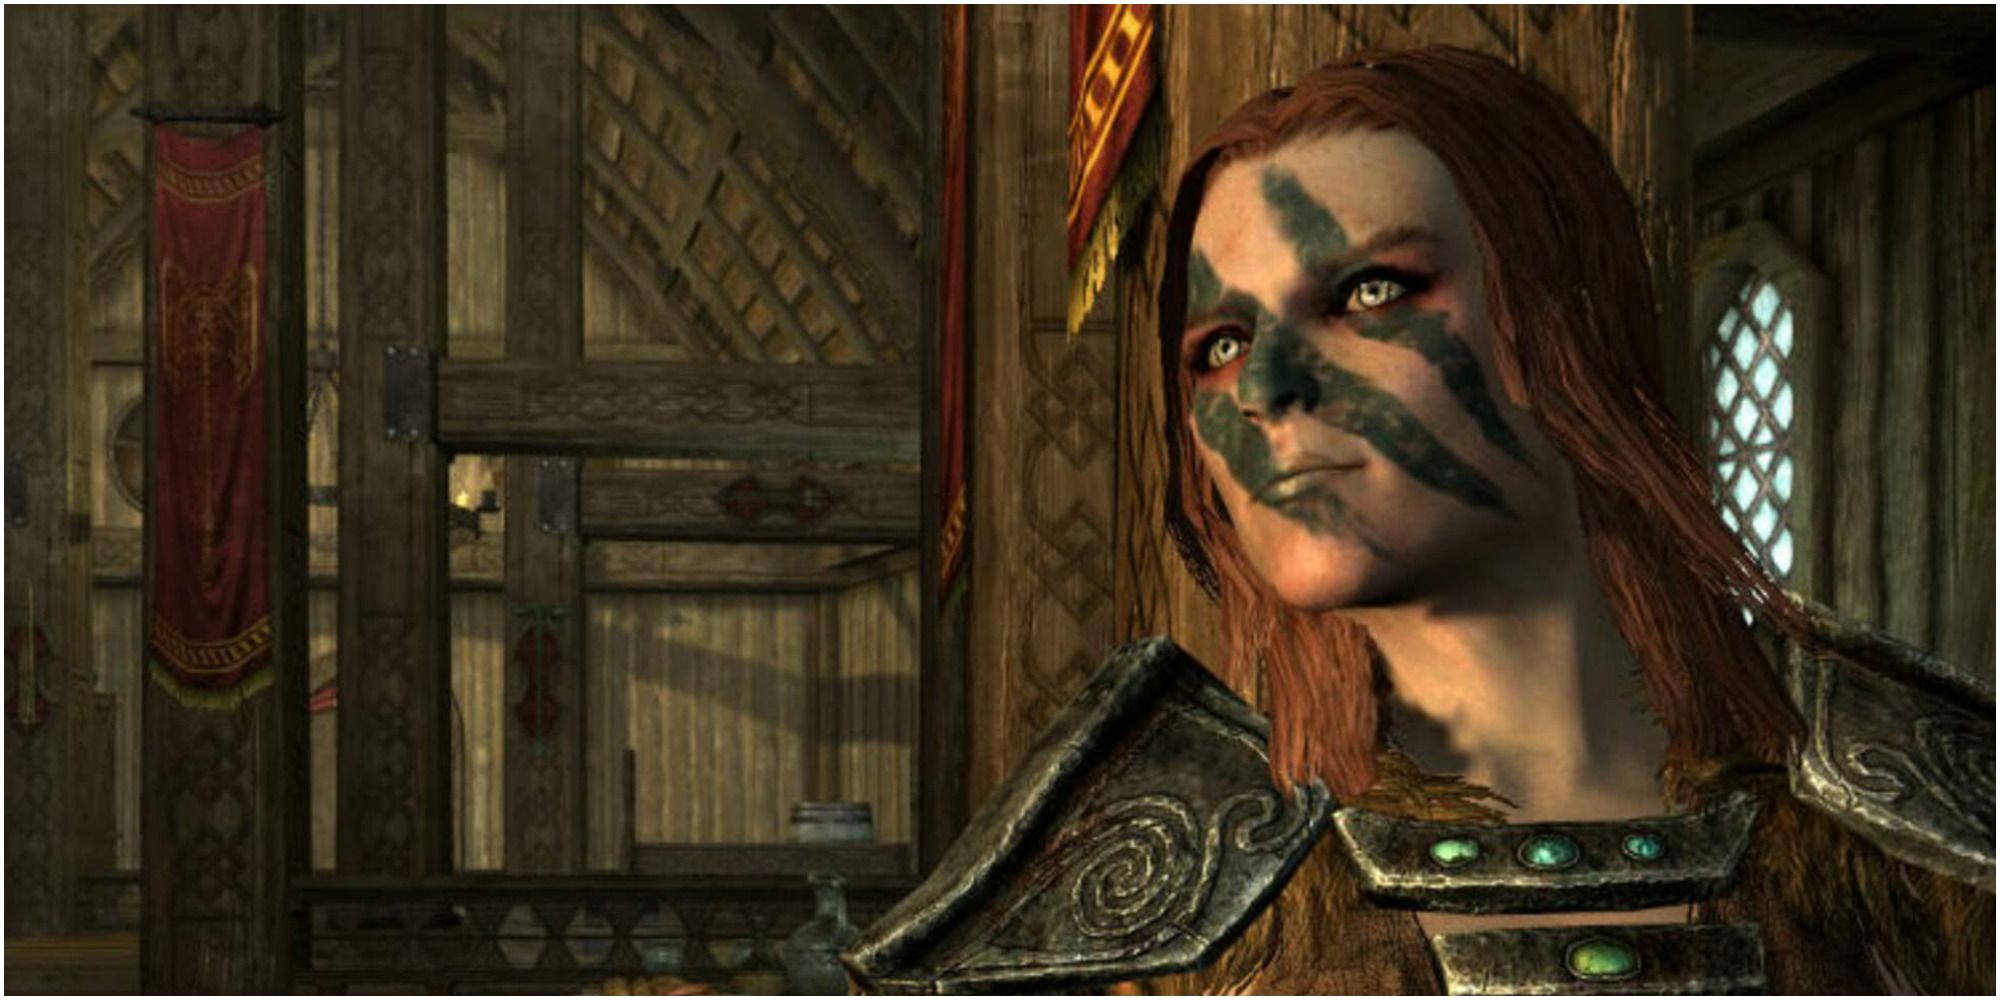 Aela the Huntress from Skyrim waits in a doorway